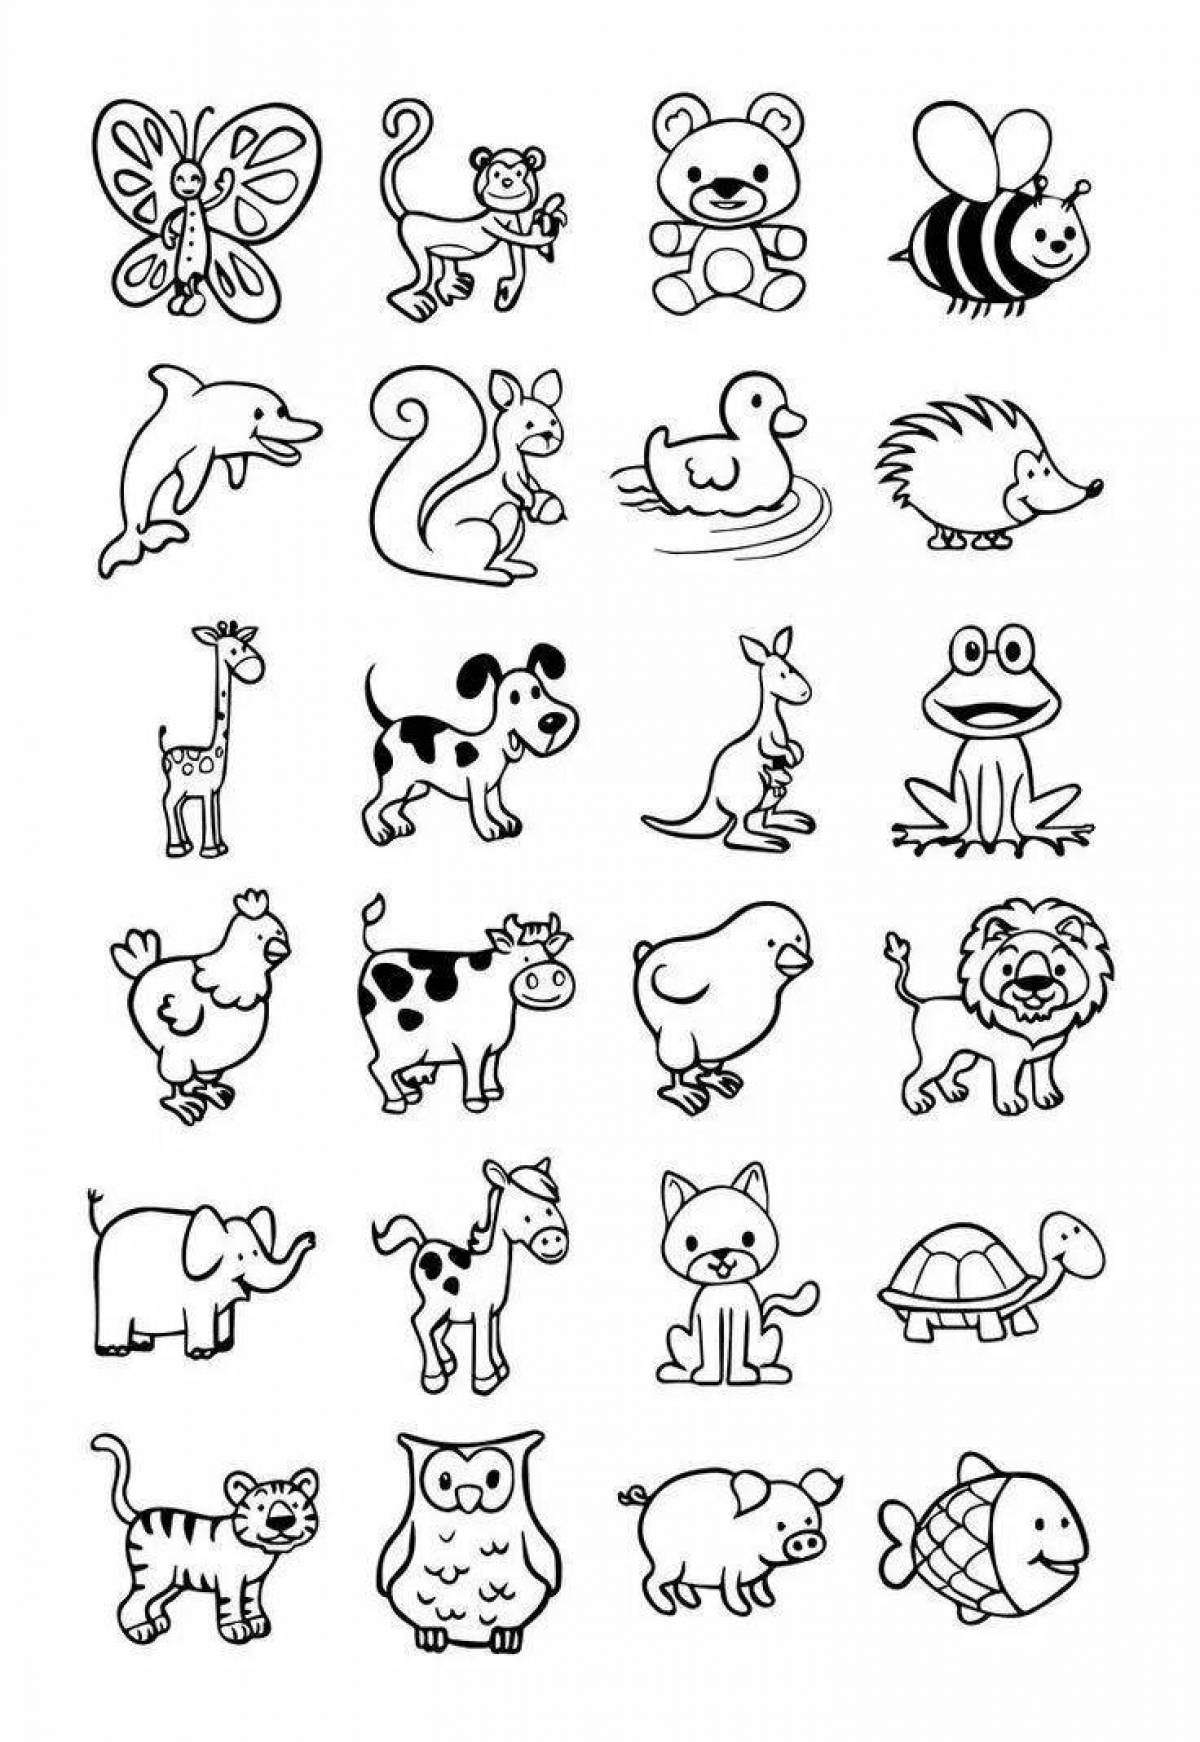 Artistic coloring pages